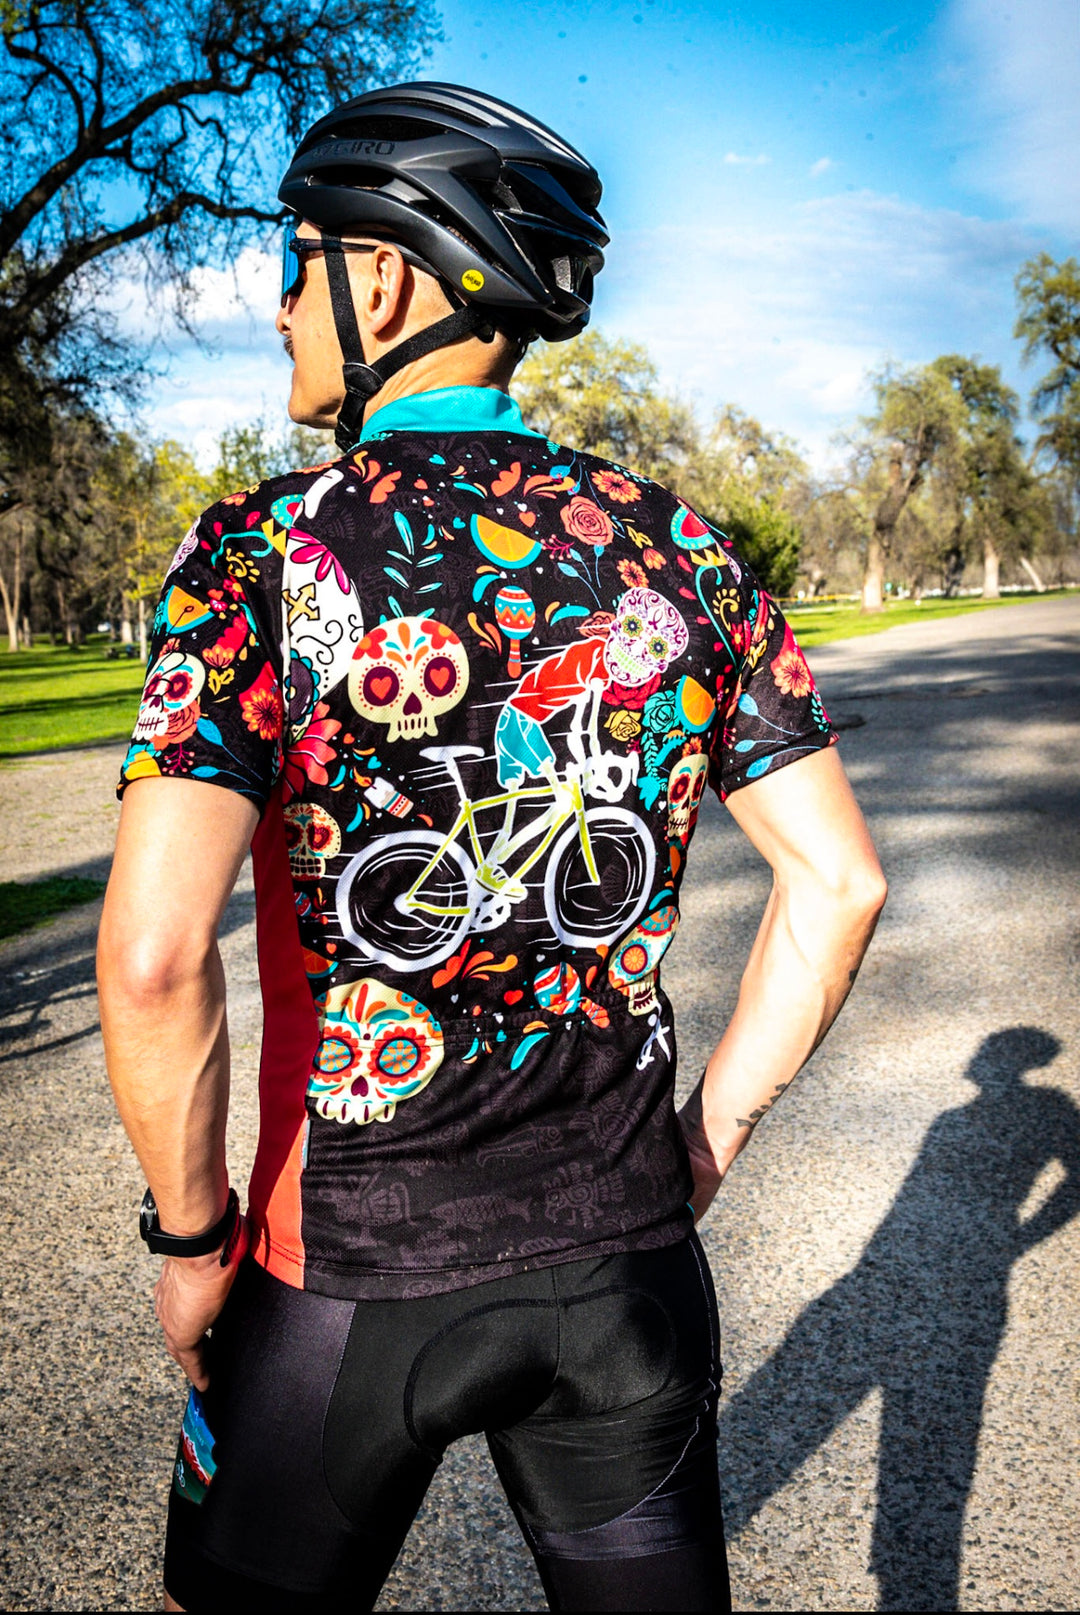 Artletic unveils Day of the Dead apparel